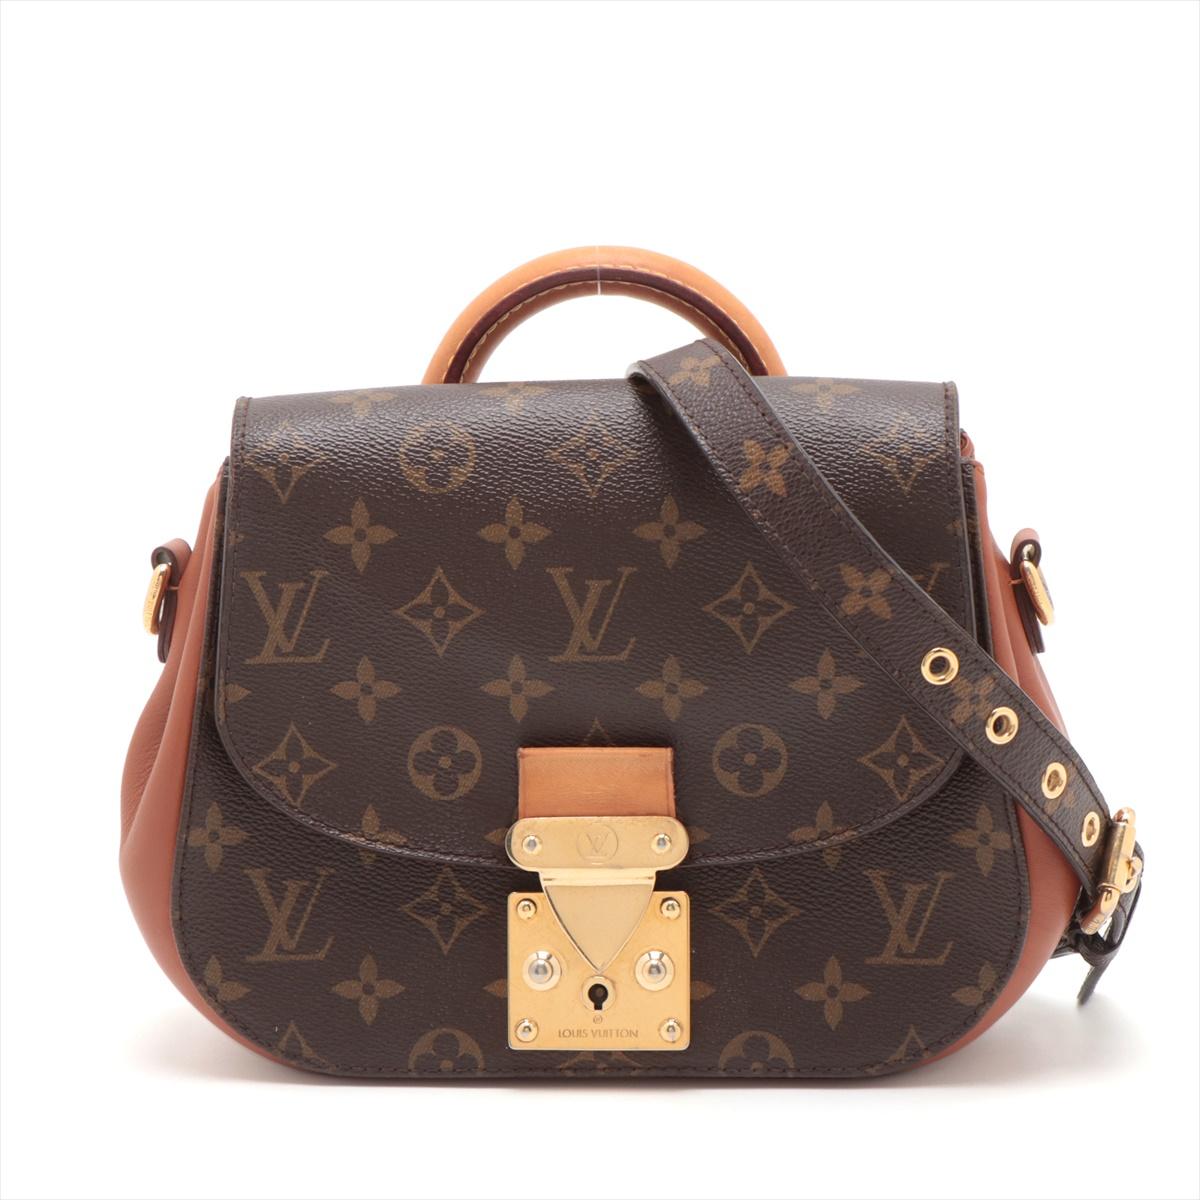 The Louis Vuitton Monogram Eden PM is a sophisticated and luxurious handbag that exudes elegance with its combination of Monogram canvas and refined details. The bag features a distinctive textured Monogram canvas with a beautiful floral pattern,